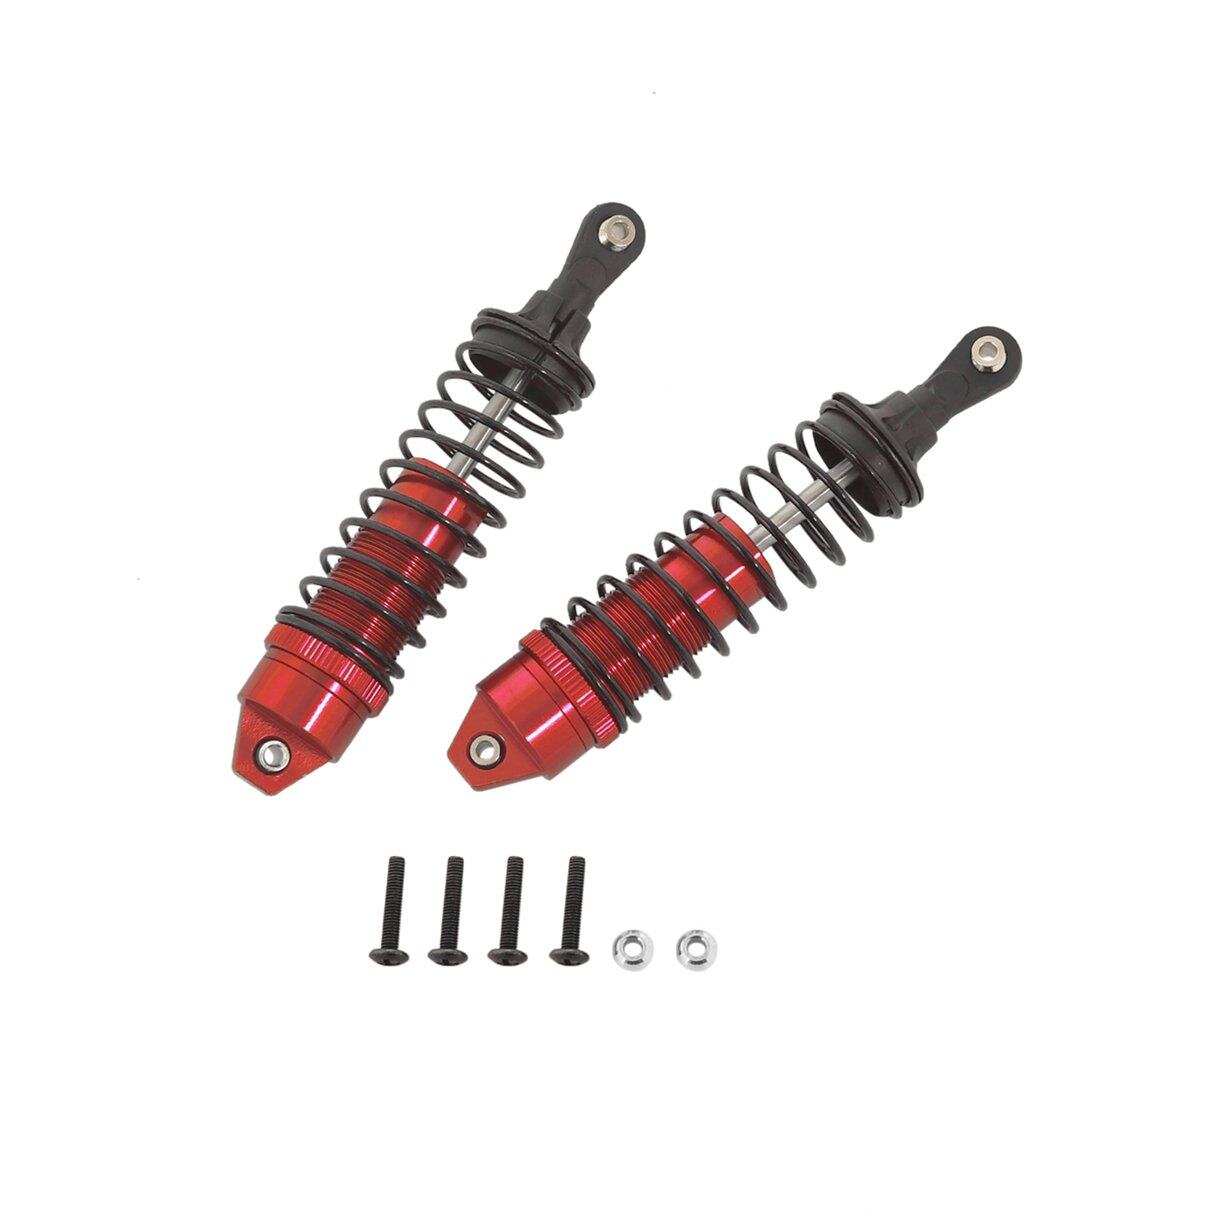 Alloy Shock Absorber Assembled Front & Rear for Traxxas 1/10 Slash 4x4 4WD 2WD 